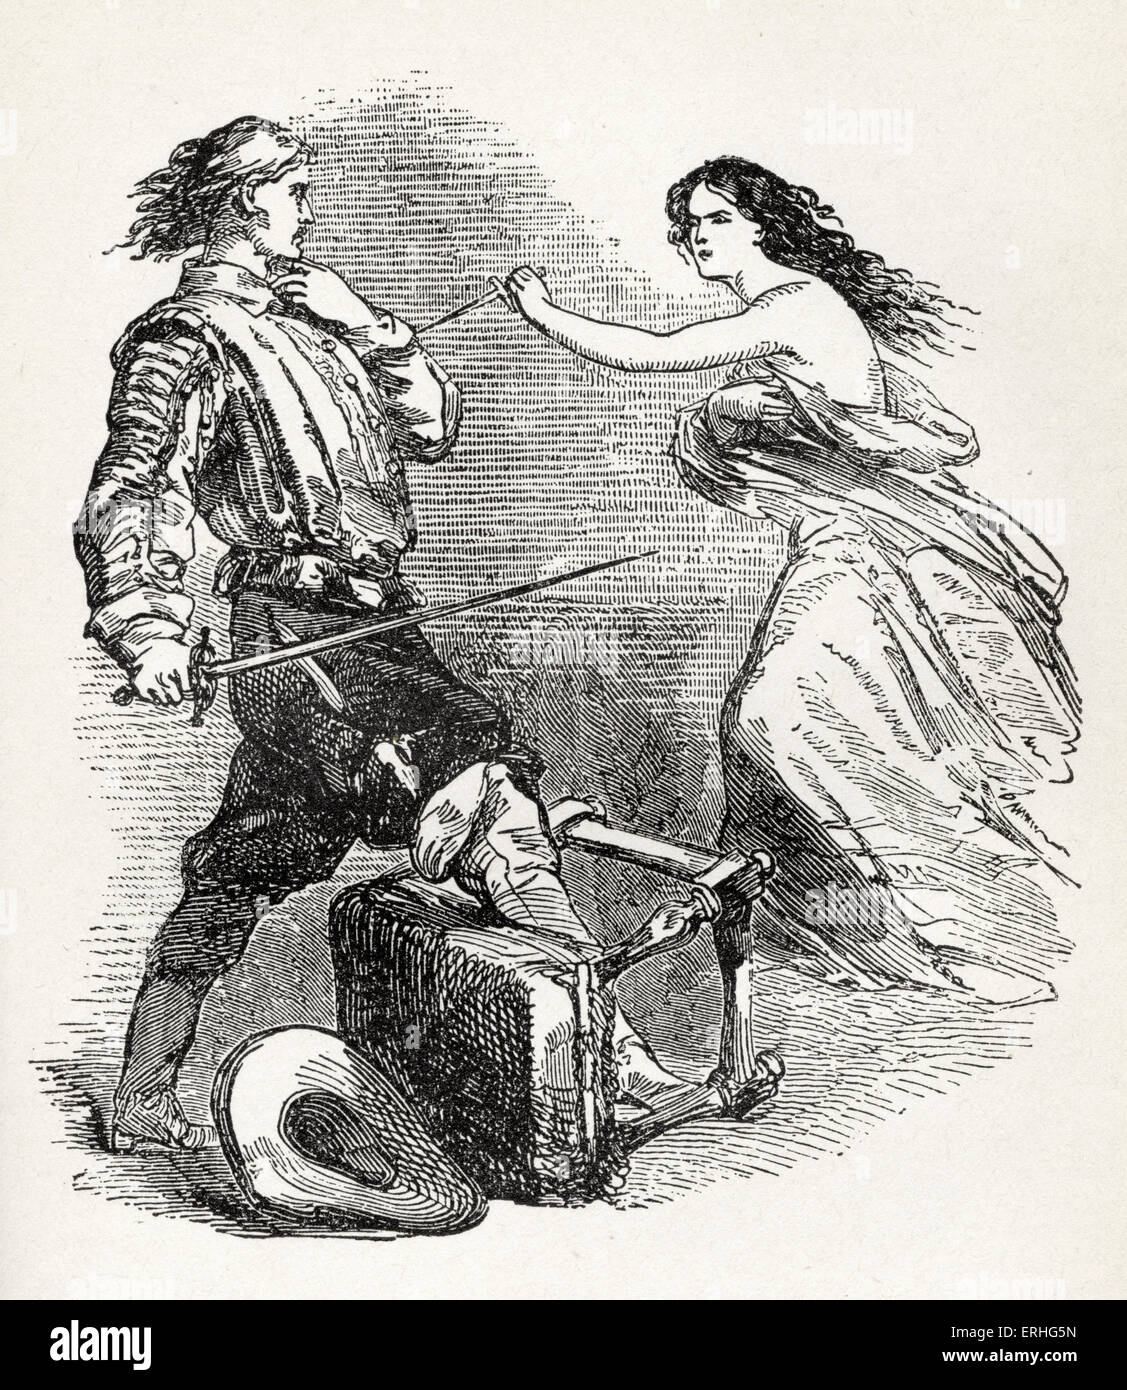 'The Three Musketeers' - illustration from the book by Alexandre Dumas of d'Artagnan being attacked by 'Milady'. French author, Stock Photo